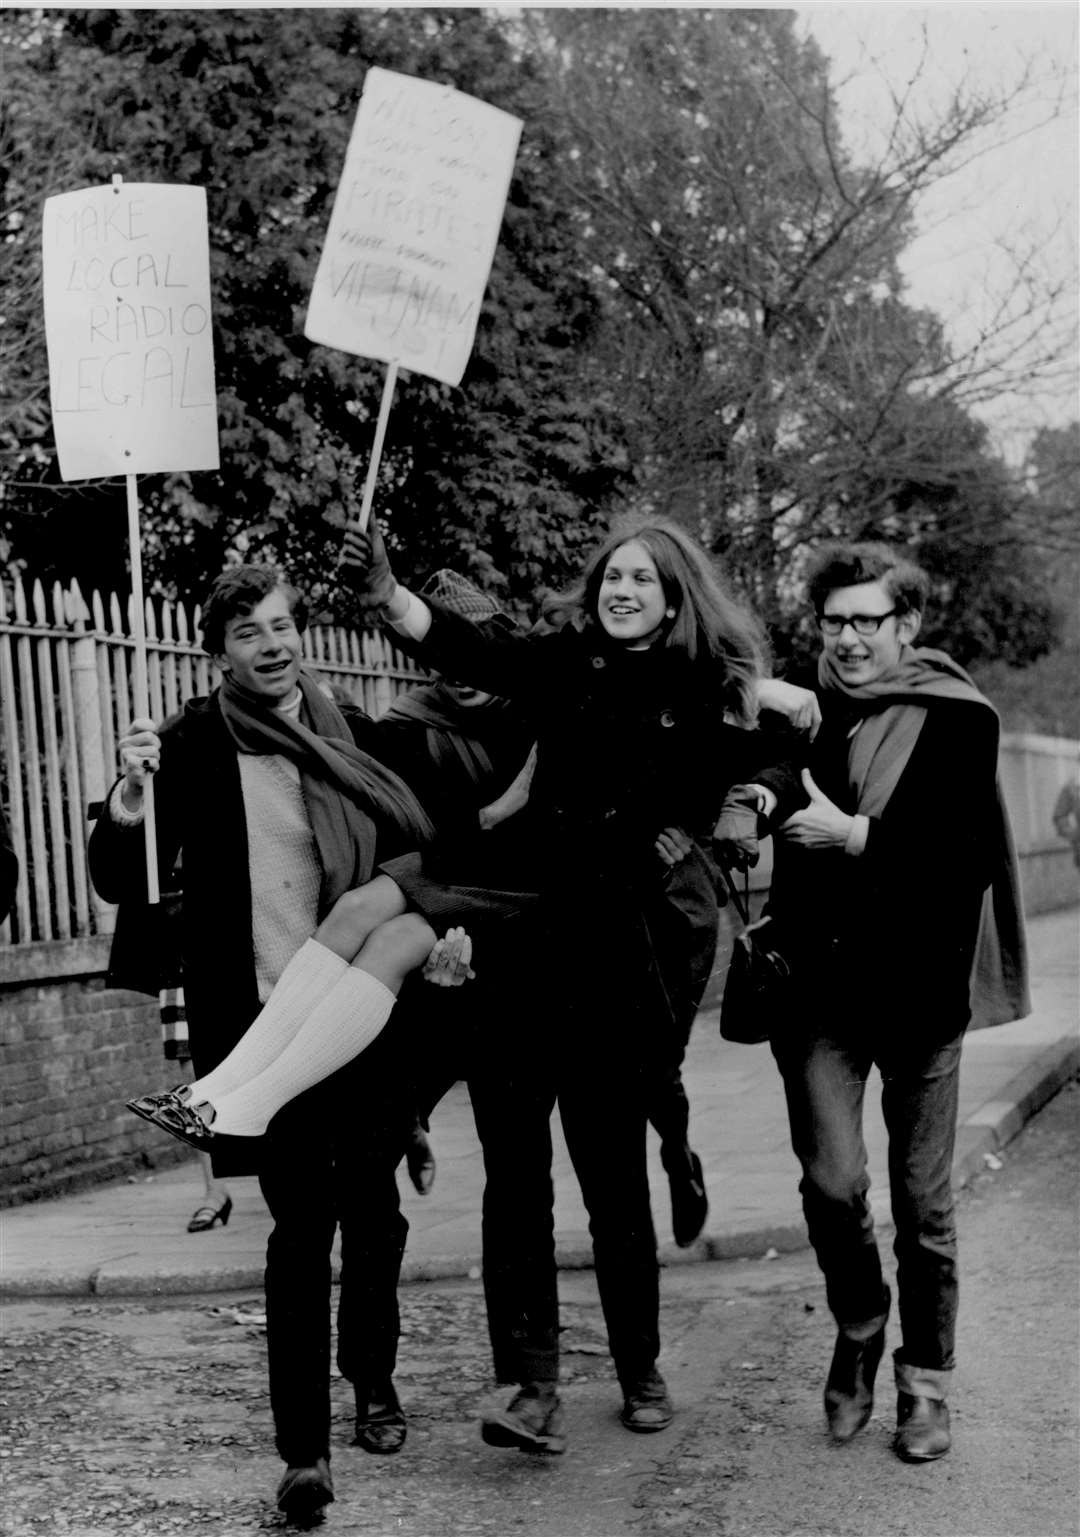 University students demonstrate in November 1966 outside Canterbury Sessions House, where Radio 390 (broadcasting from the wartime Red Sands Towers in the Thames Estuary) was the first pirate radio station to be prosecuted